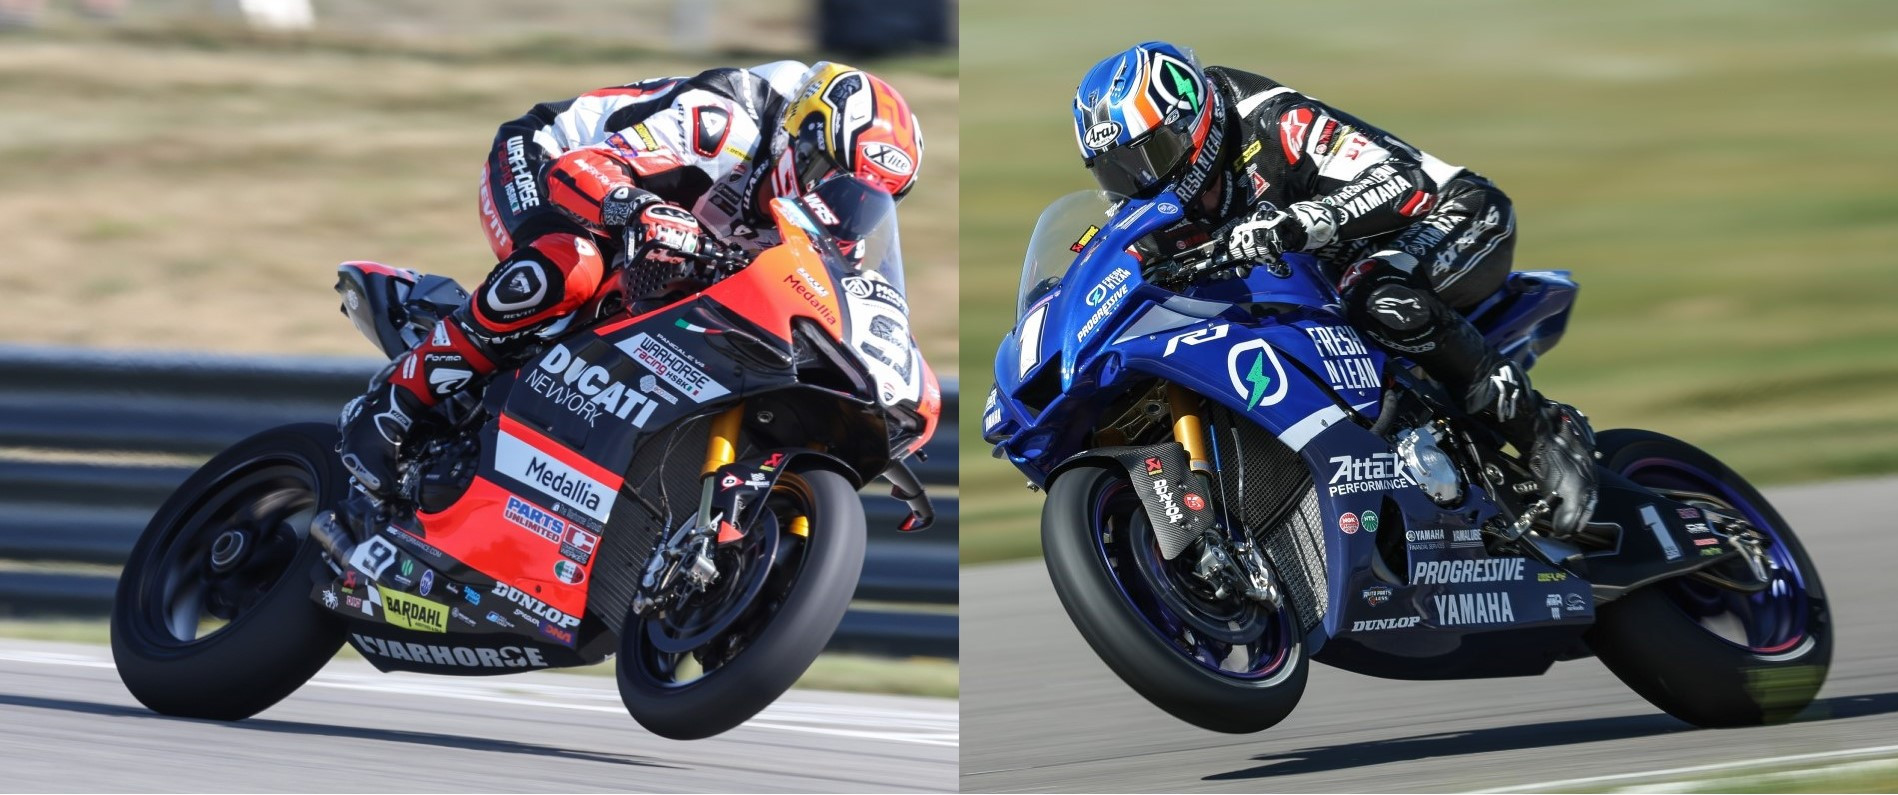 Danilo Petrucci (9) and Jake Gagne (1) are separated by one point in the MotoAmerica Medallia Superbike Championship heading into New Jersey Motorsports Park. Photos by Brian J. Nelson.